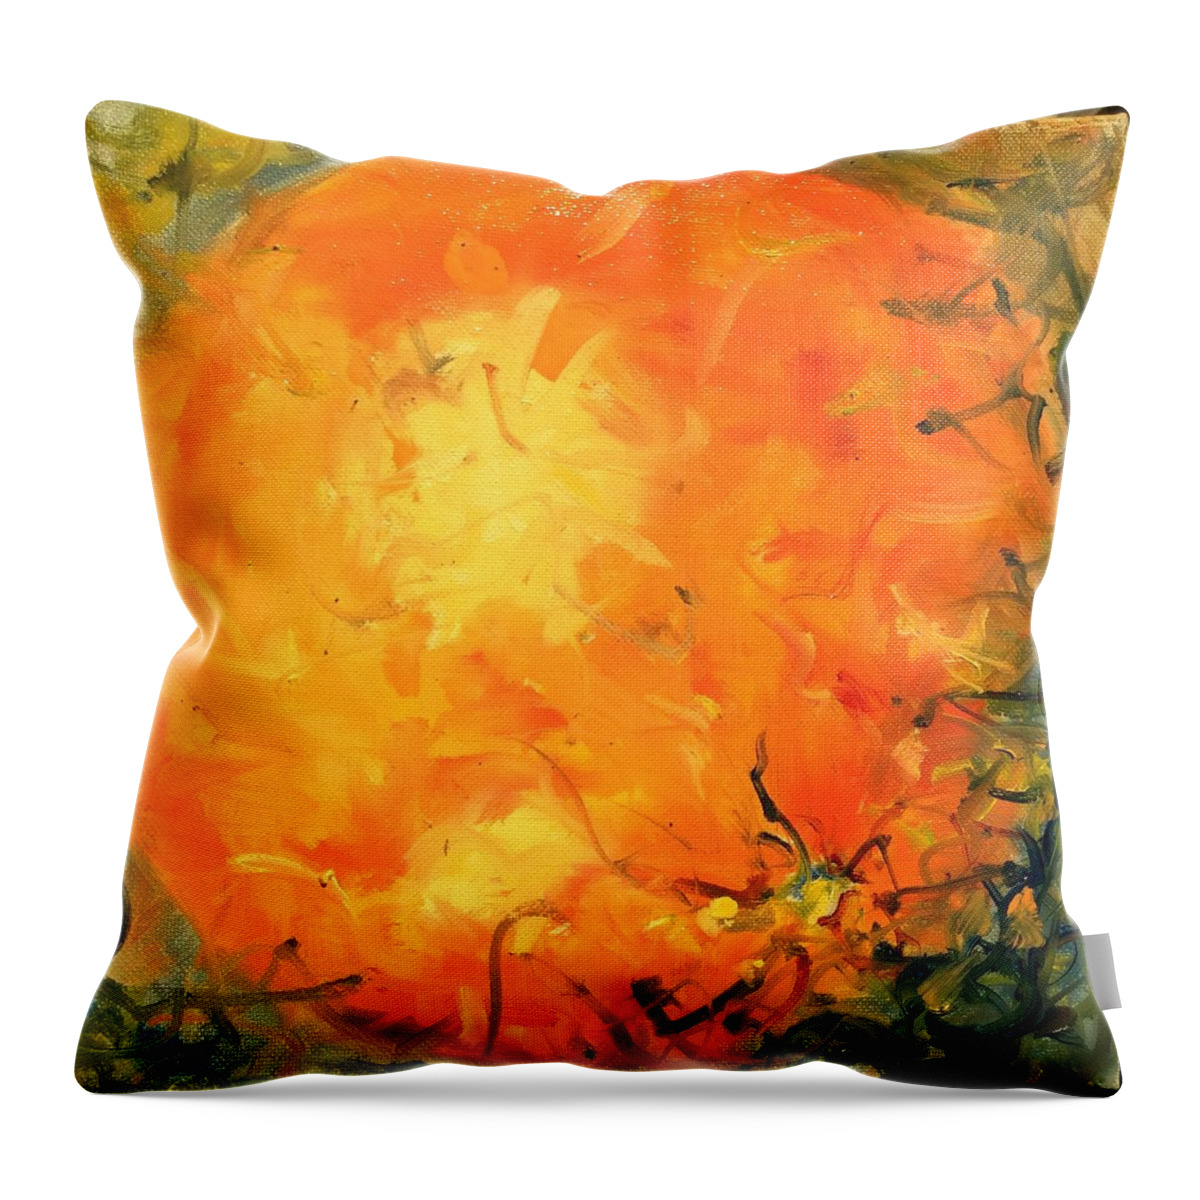 Colorist Throw Pillow featuring the painting Grounded Orange by Karen Carmean